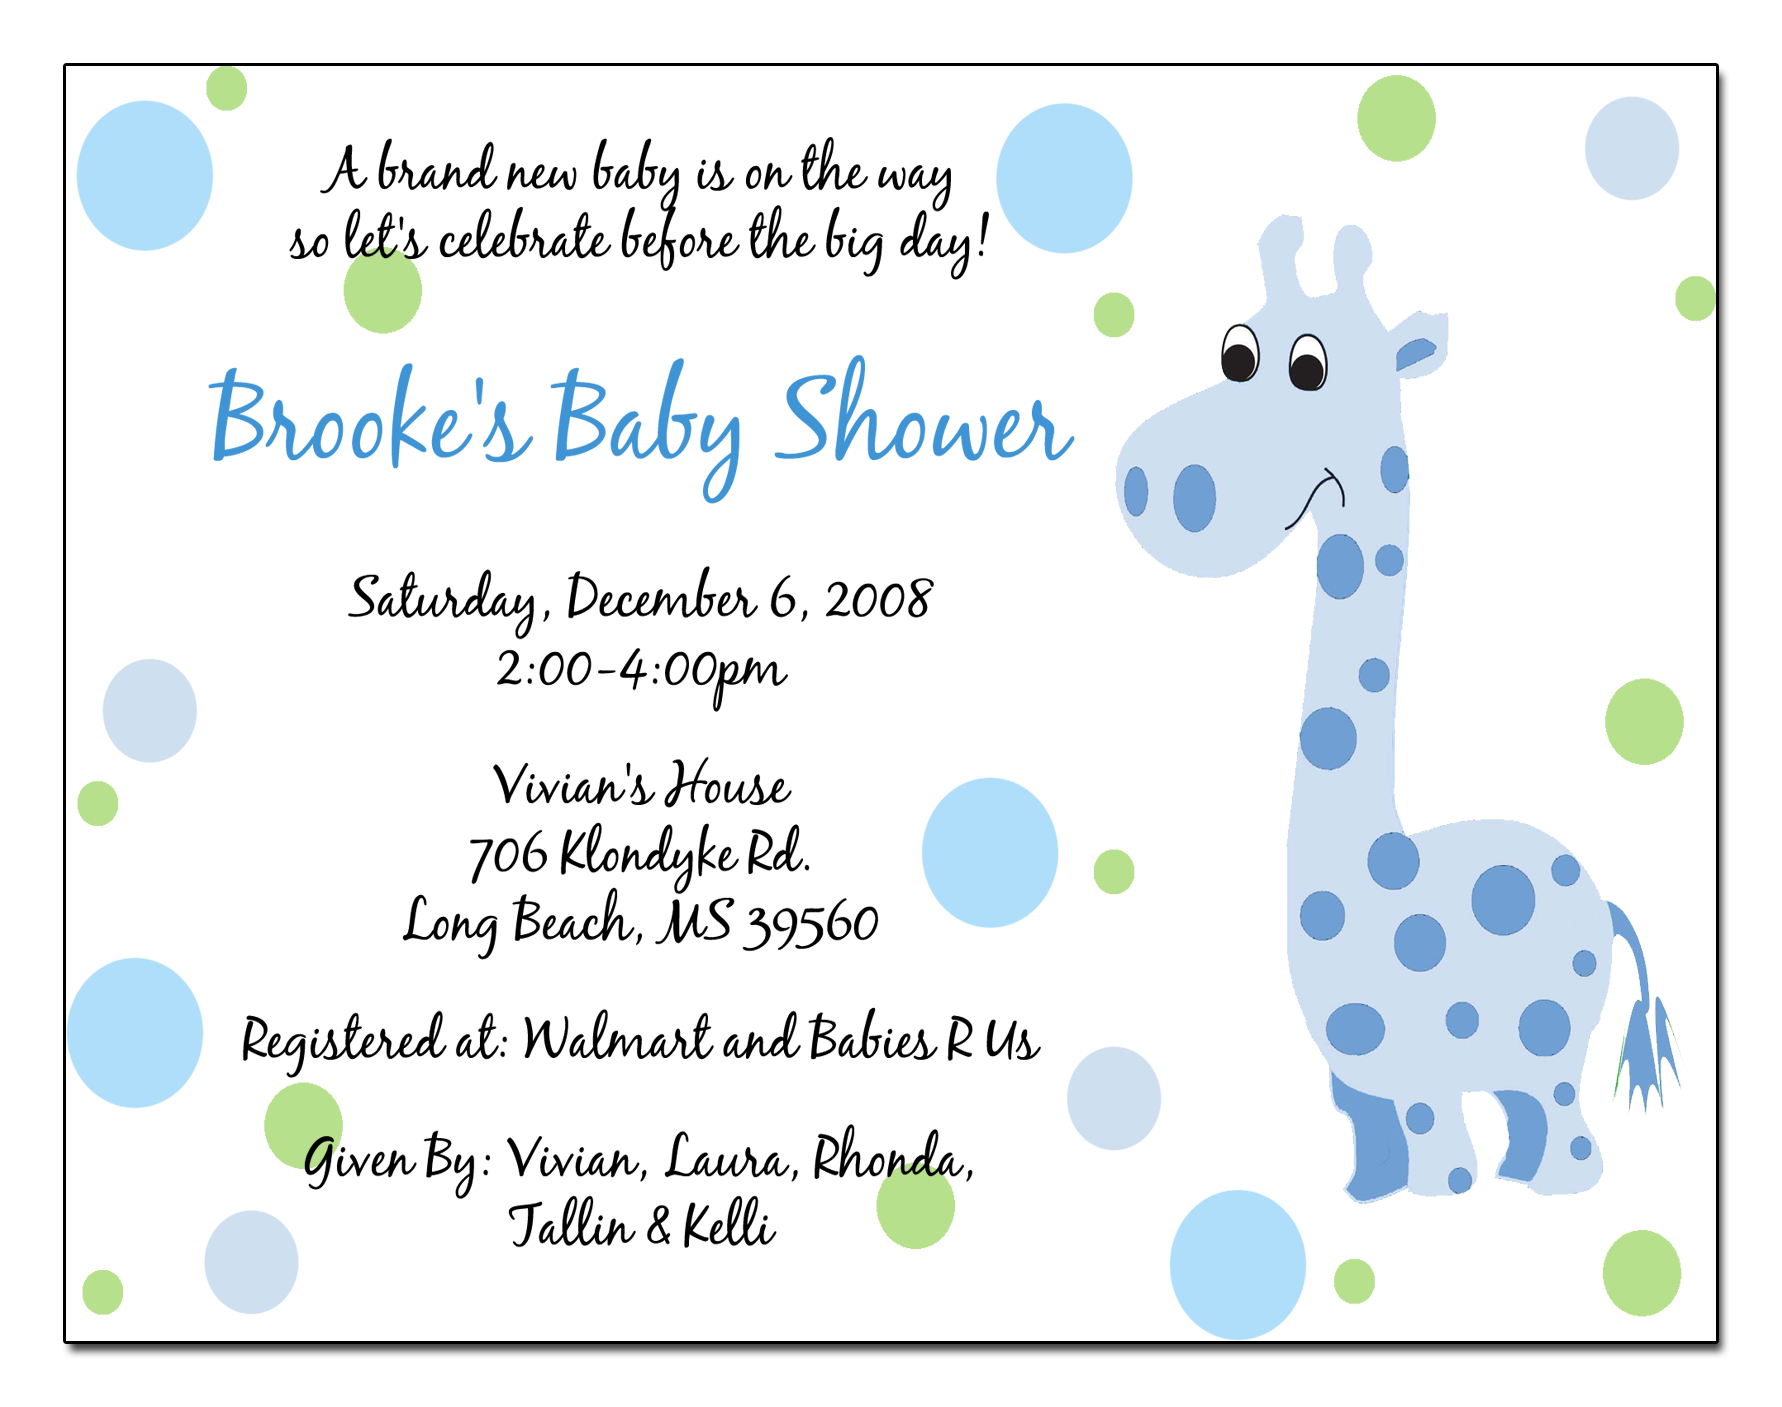 Full Size of Baby Shower:63+ Delightful Cheap Baby Shower Invitations Image Inspirations Cheap Baby Shower Invitations Colors Inexpensive Baby Shower Invitations Hot Air Balloon With Full Size Of Colorsinexpensive Baby Shower Invitations Hot Air Balloon With Awesome Ilustration Inspirational